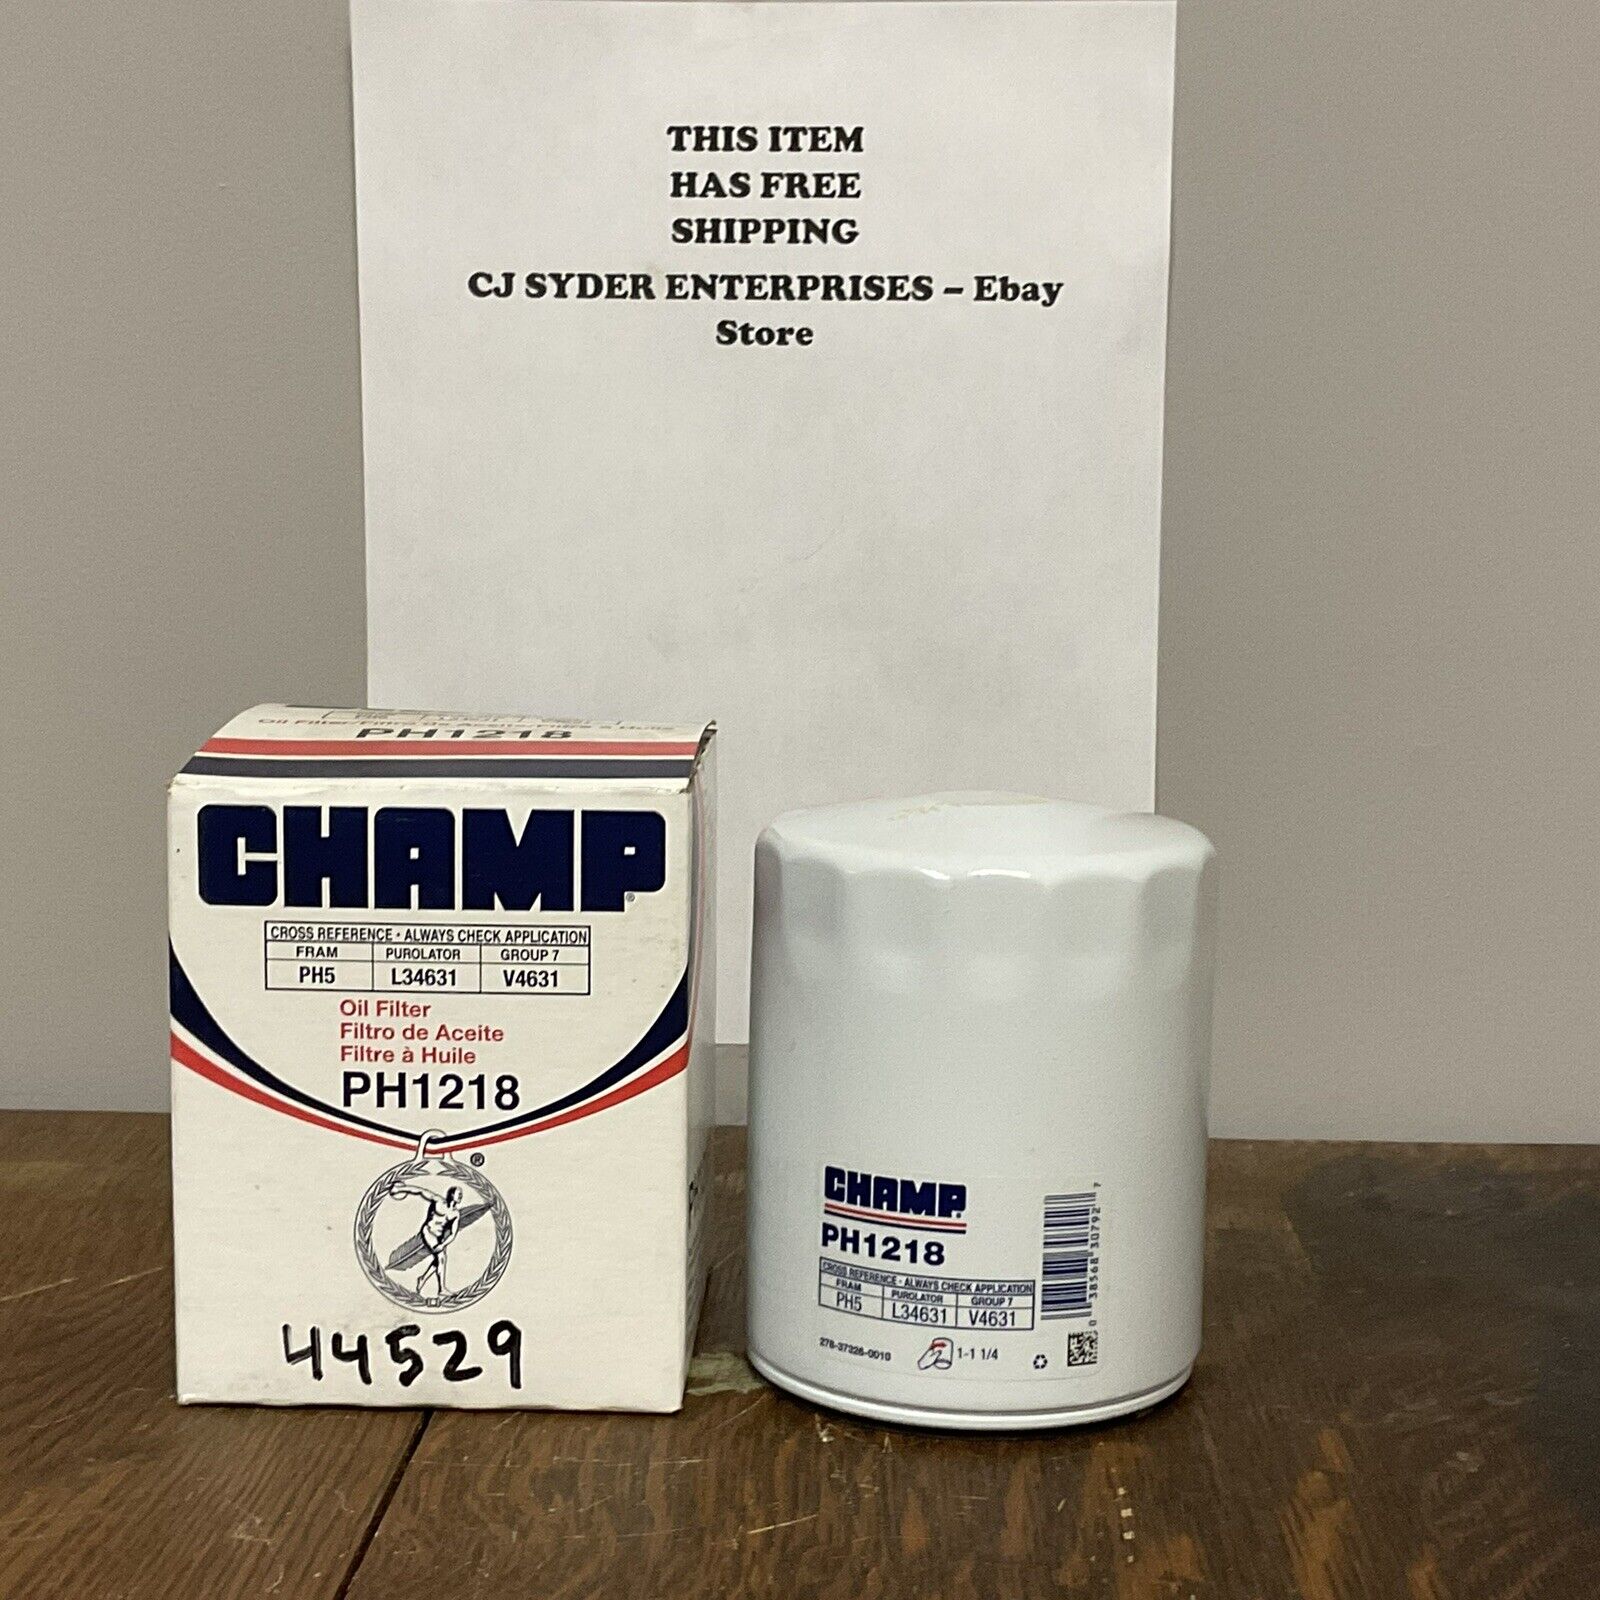 Champ Labs PH1218 Oil Filter, Pack of 1